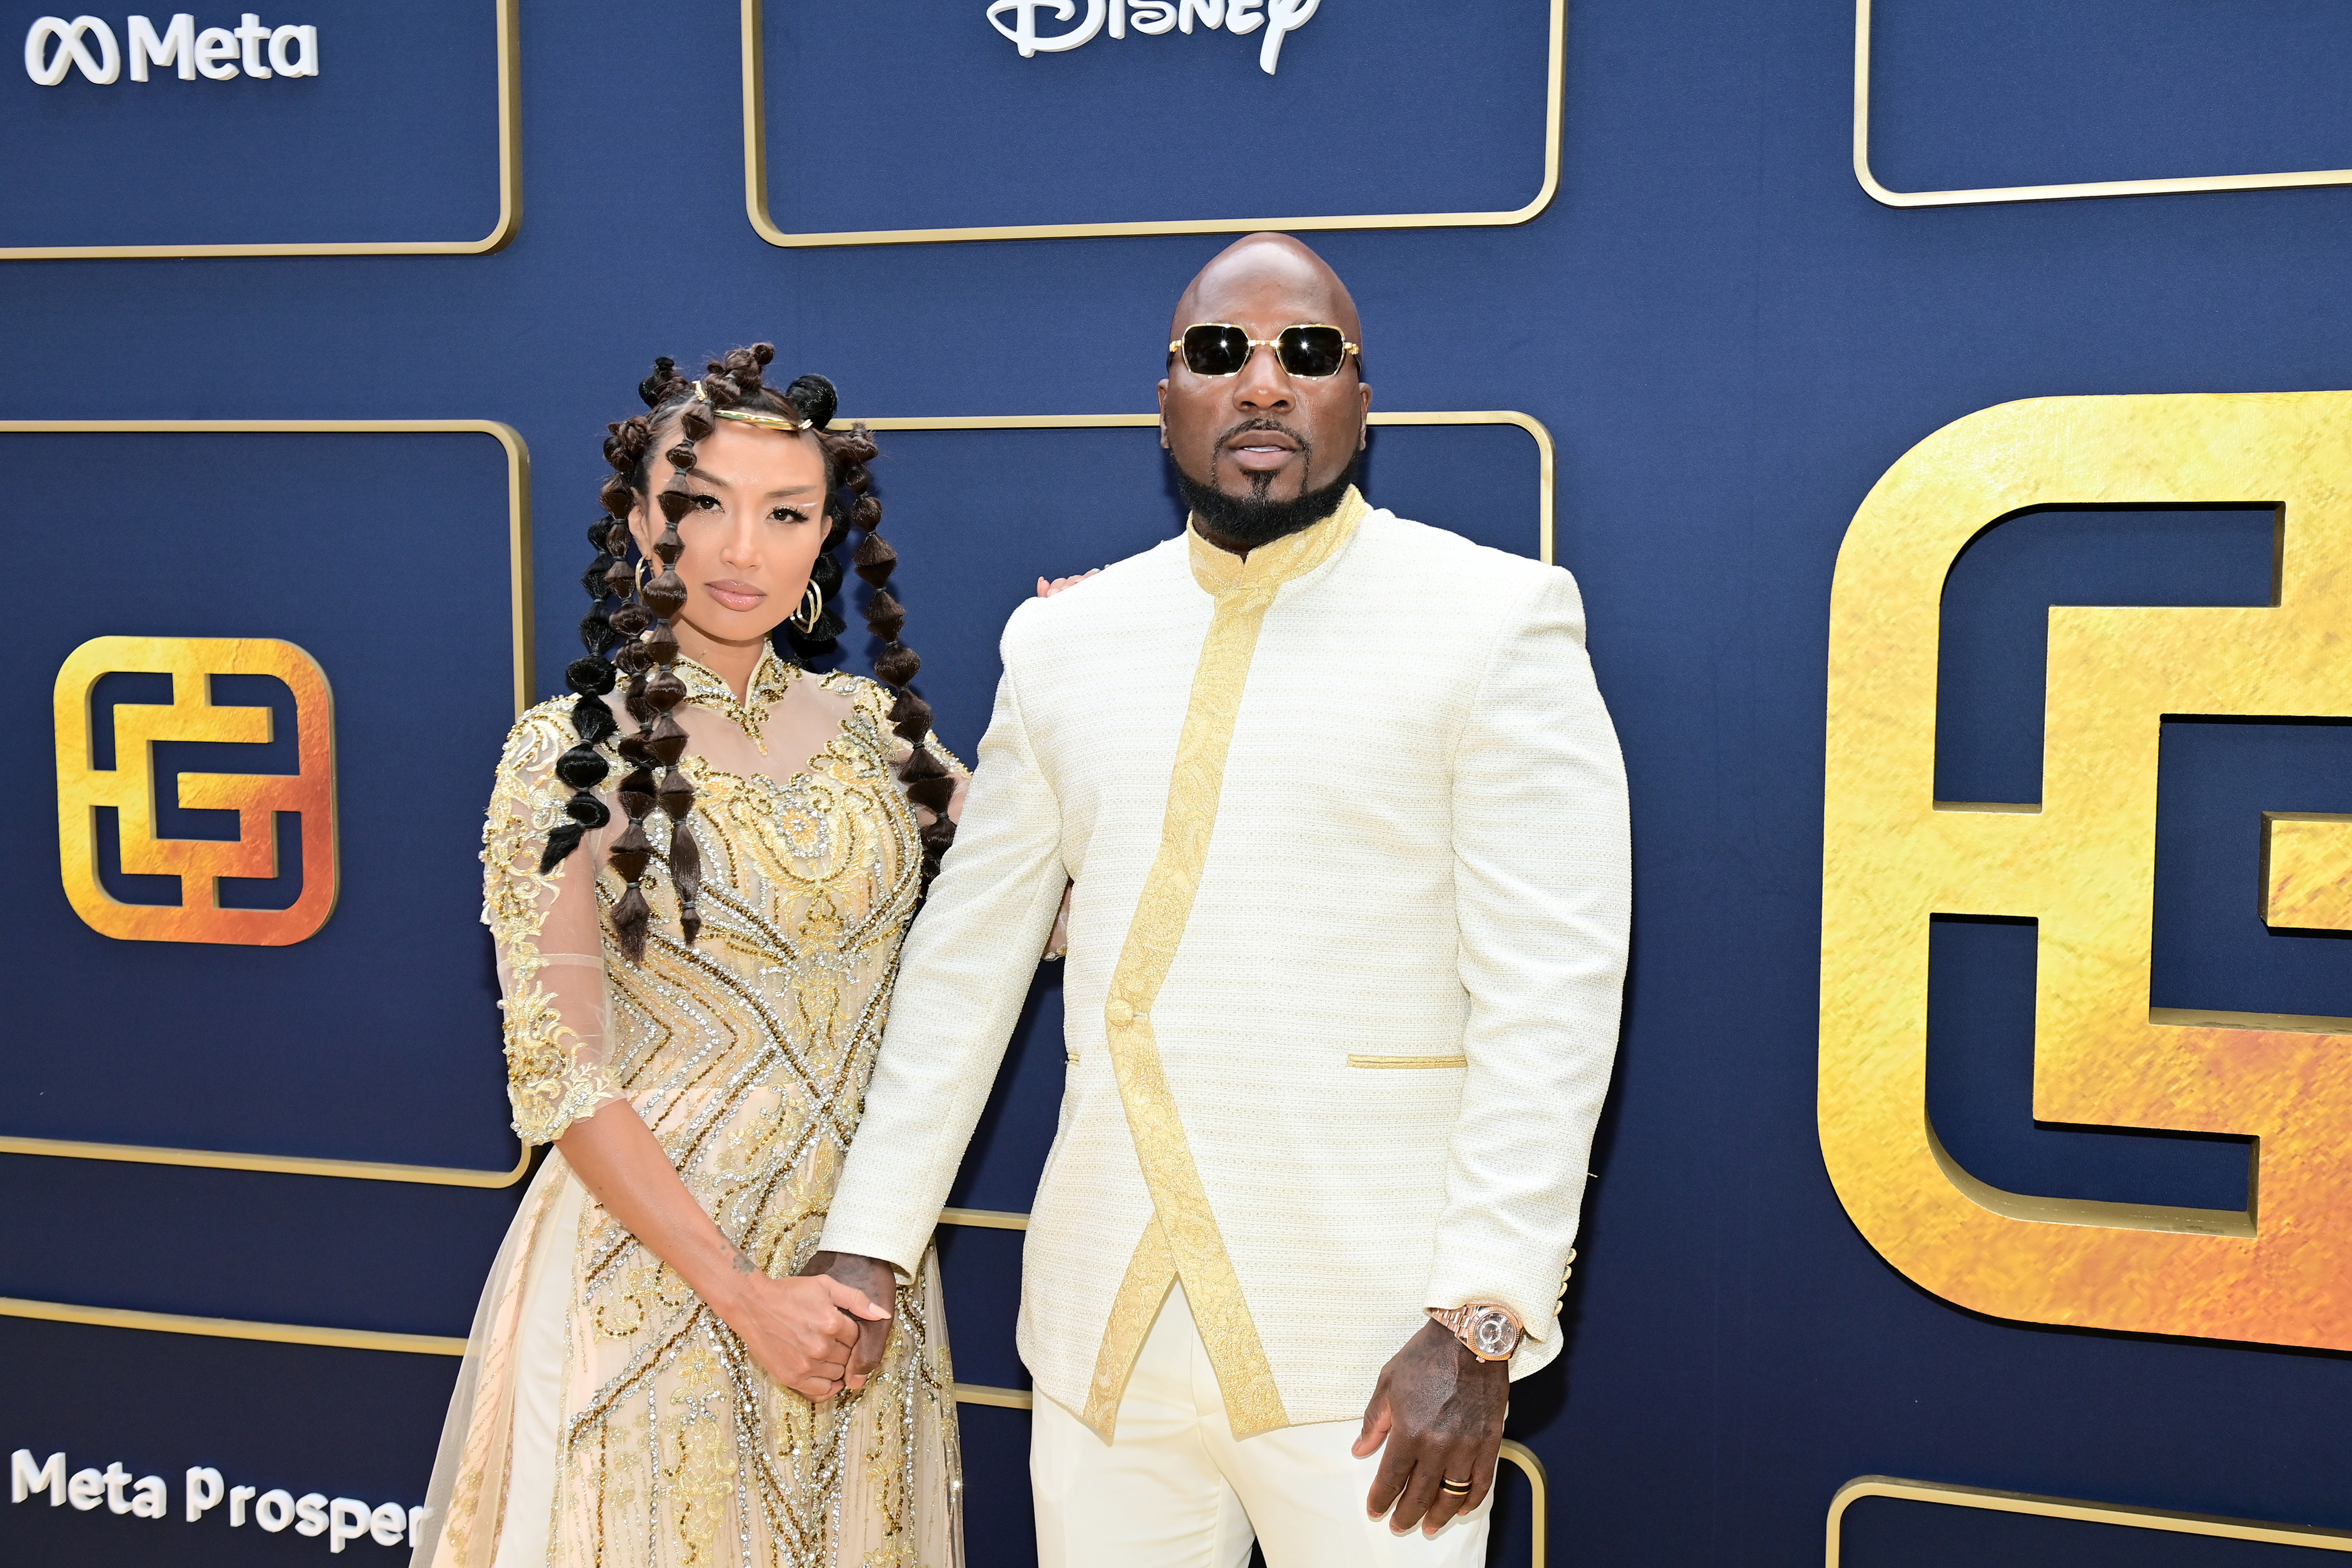 Jeannie and Jeezy at a media event